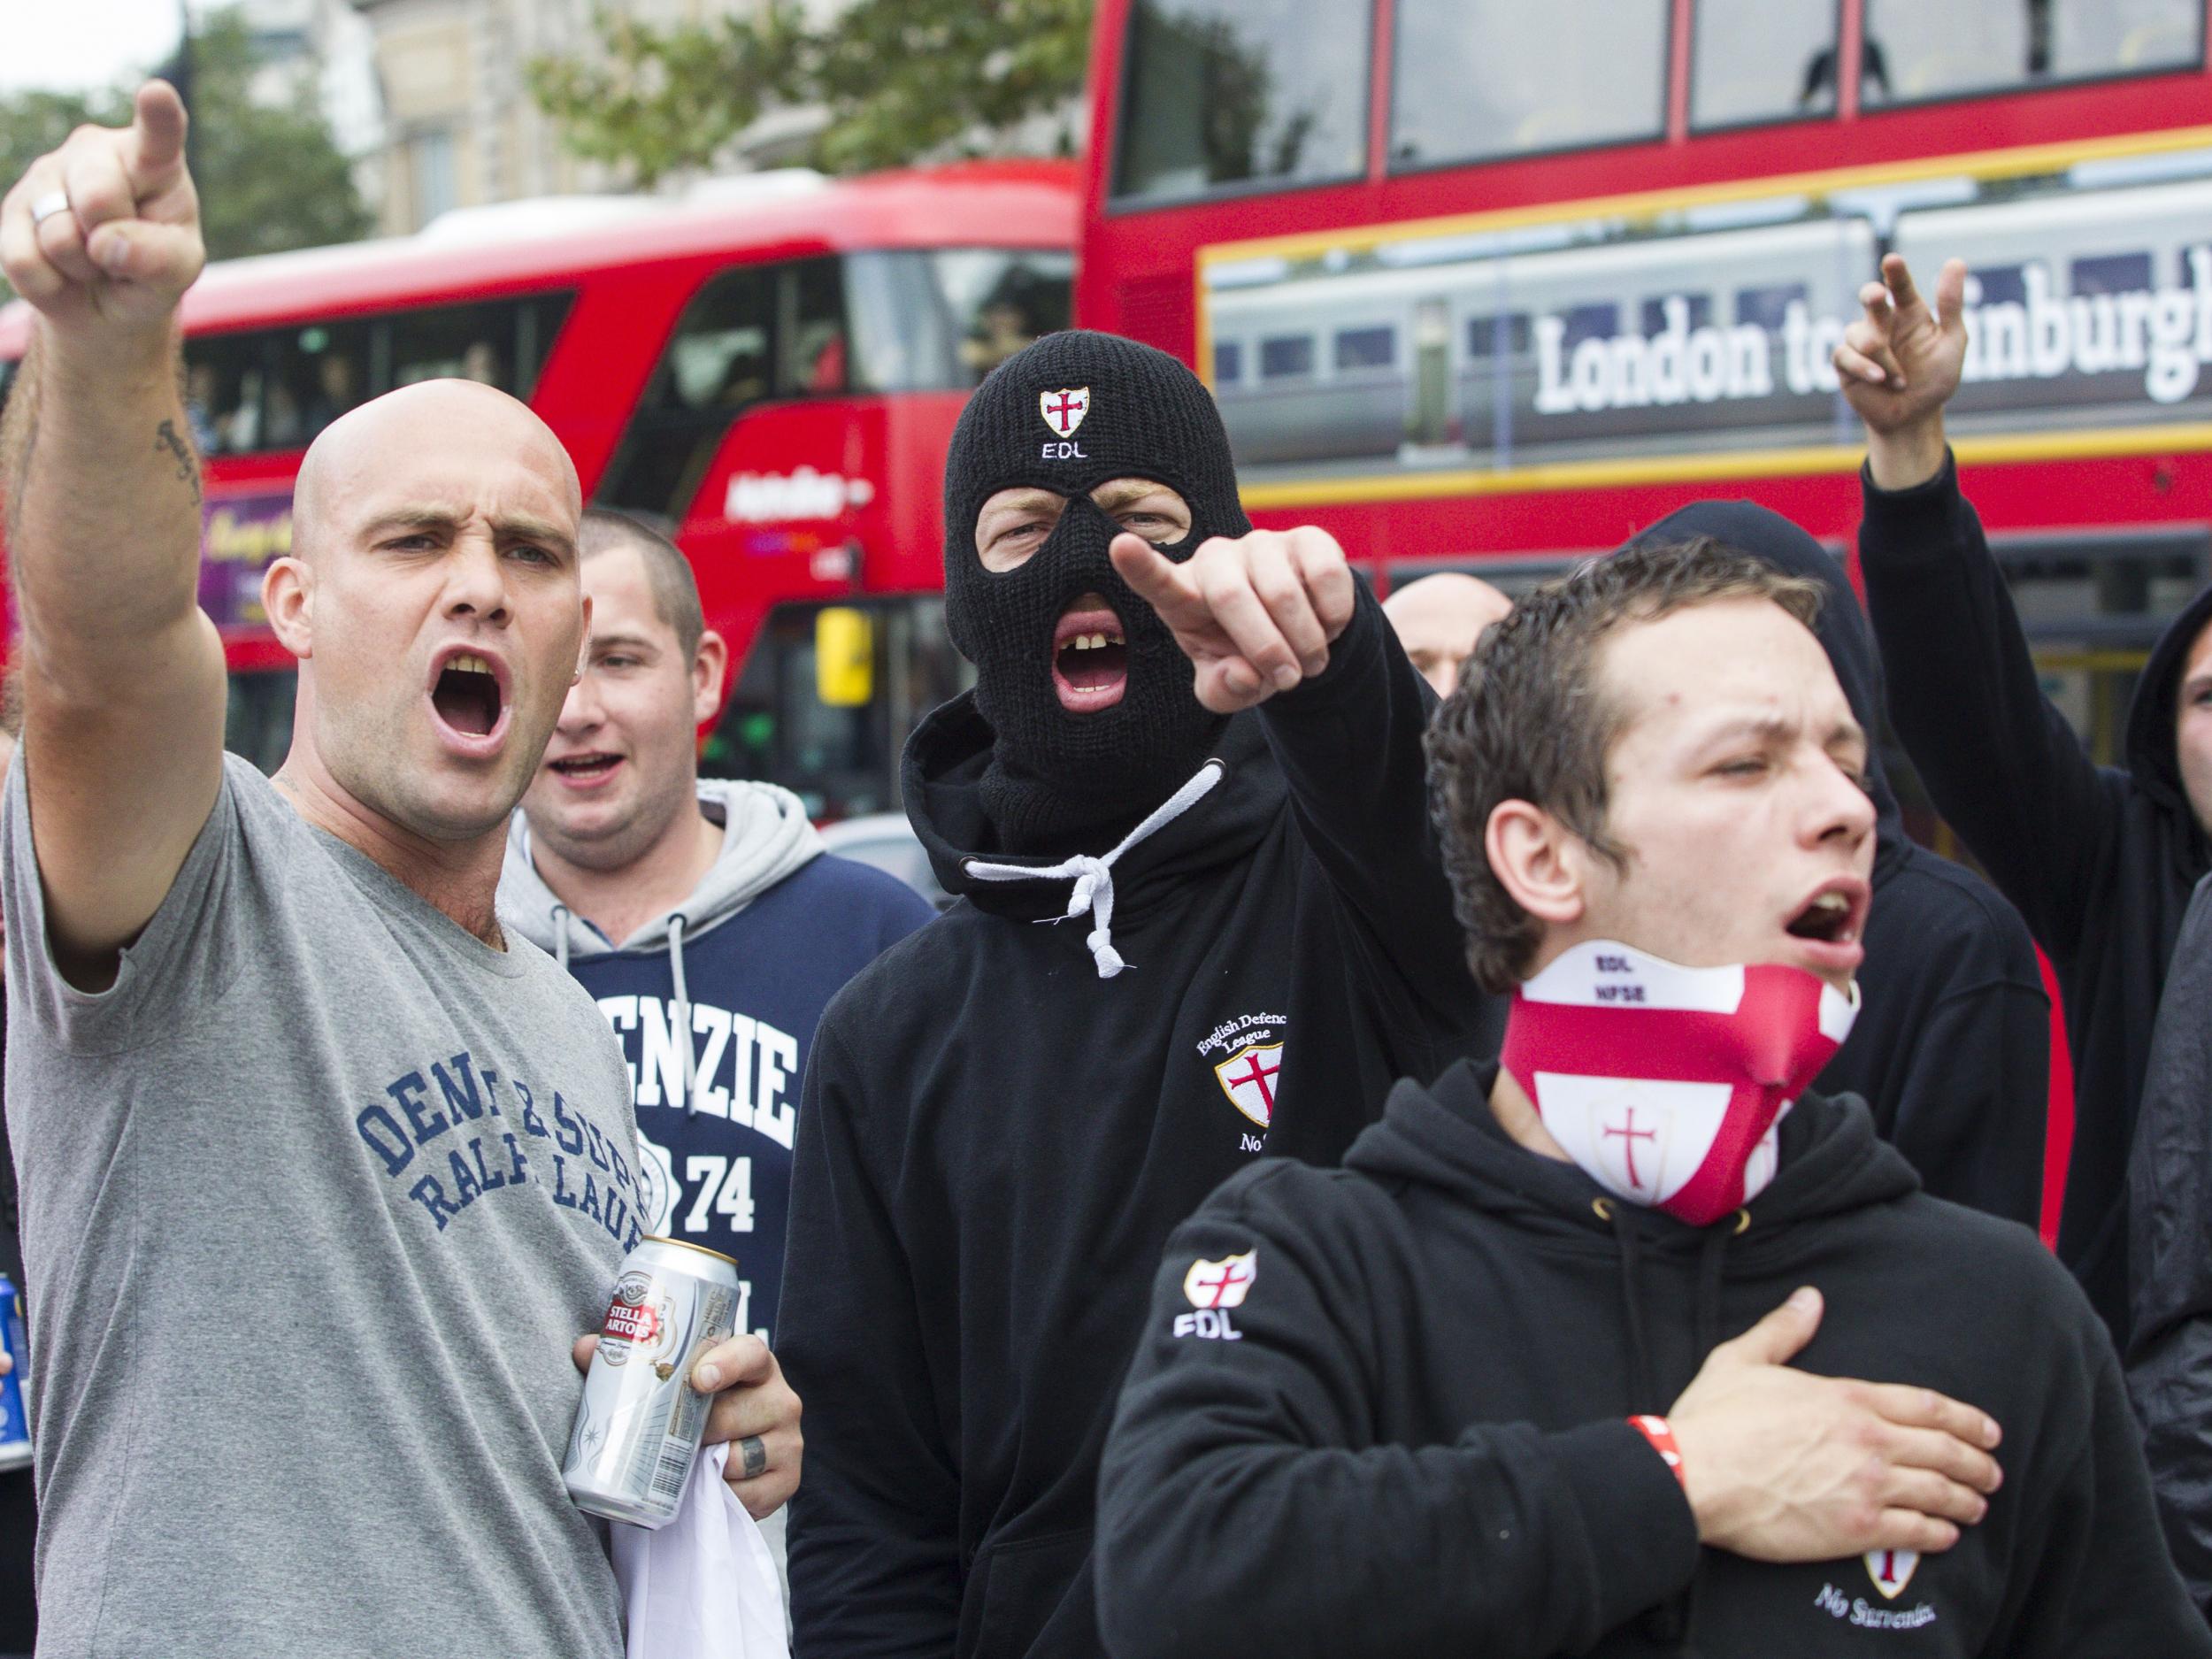 Supports of the far-right English Defence League have held a growing number of demonstrations in the UK over the last few years